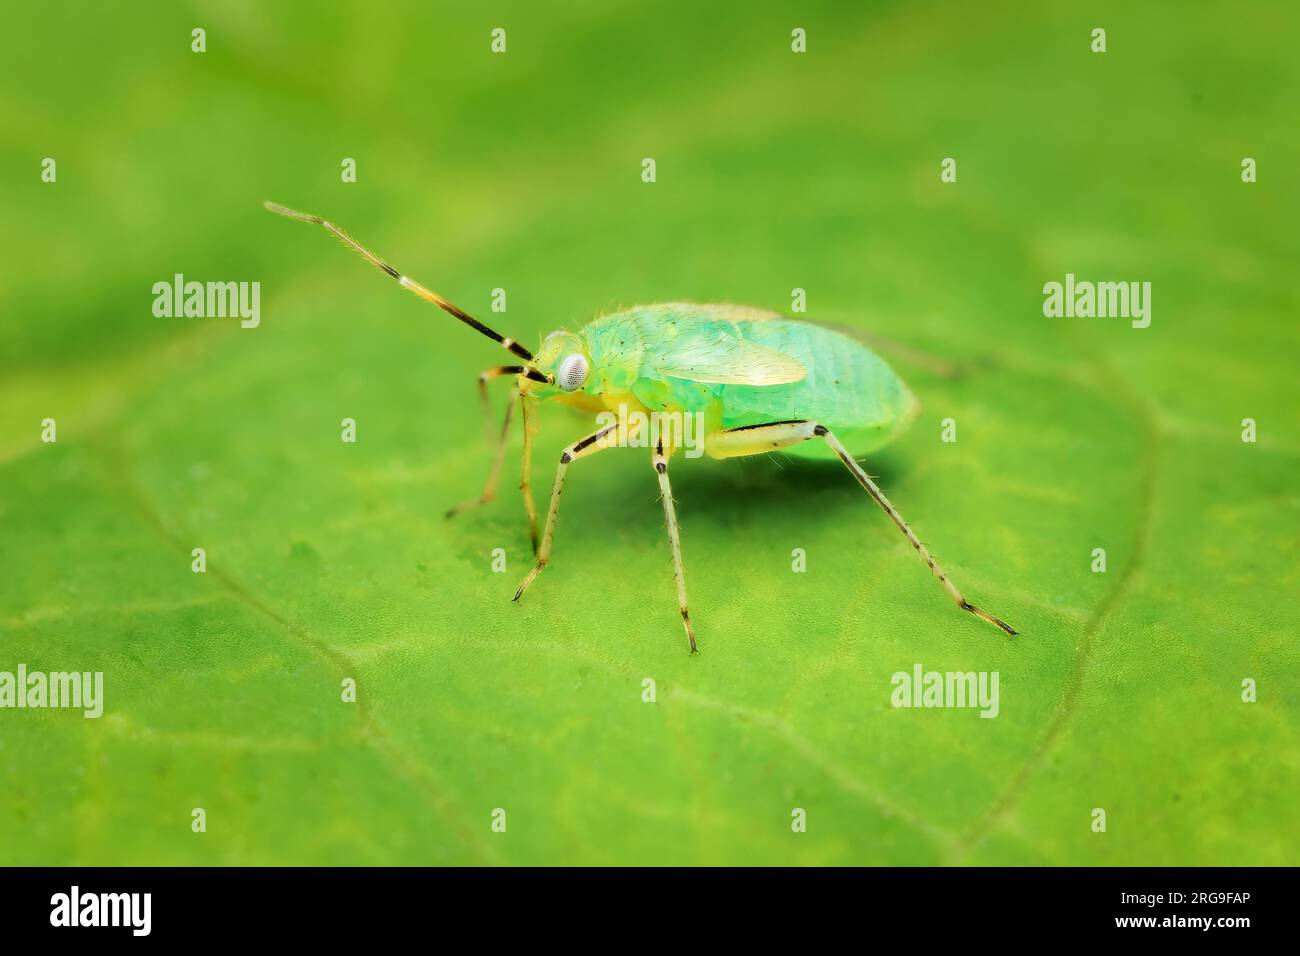 small Miridae nymph feeding on a green leaf with blurred background and copy space Stock Photo